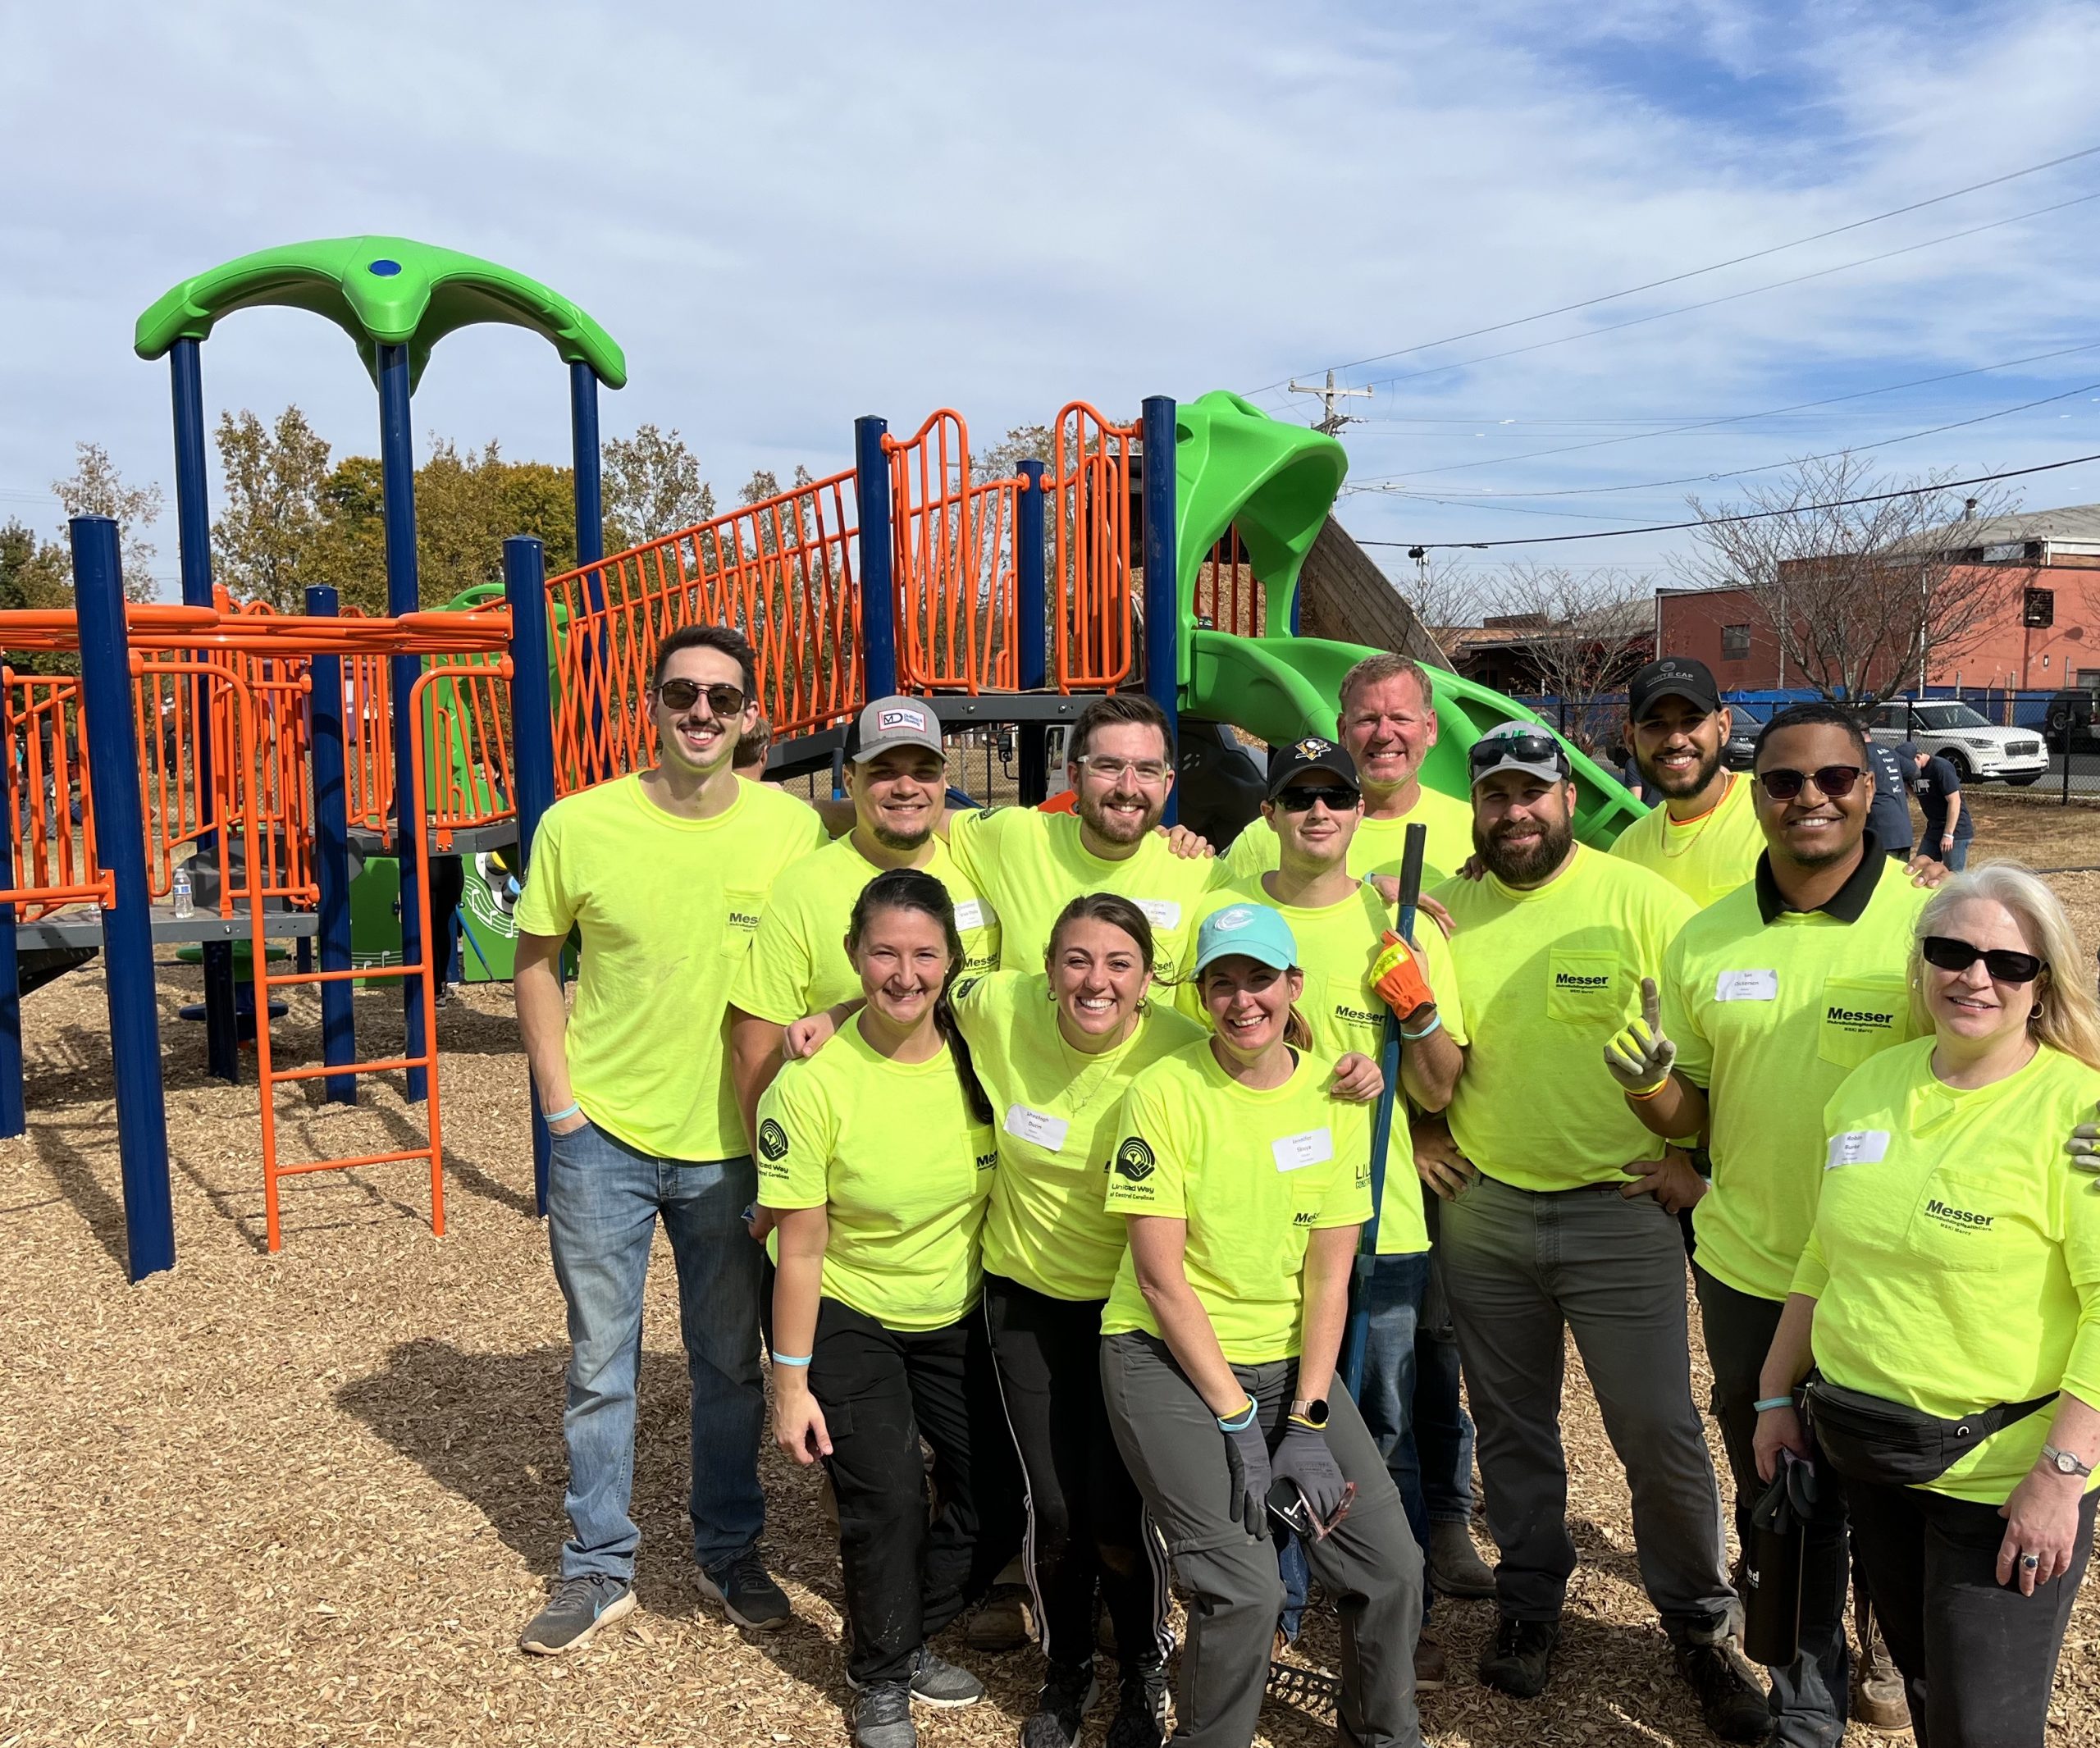 Group of volunteers standing outside on a playground